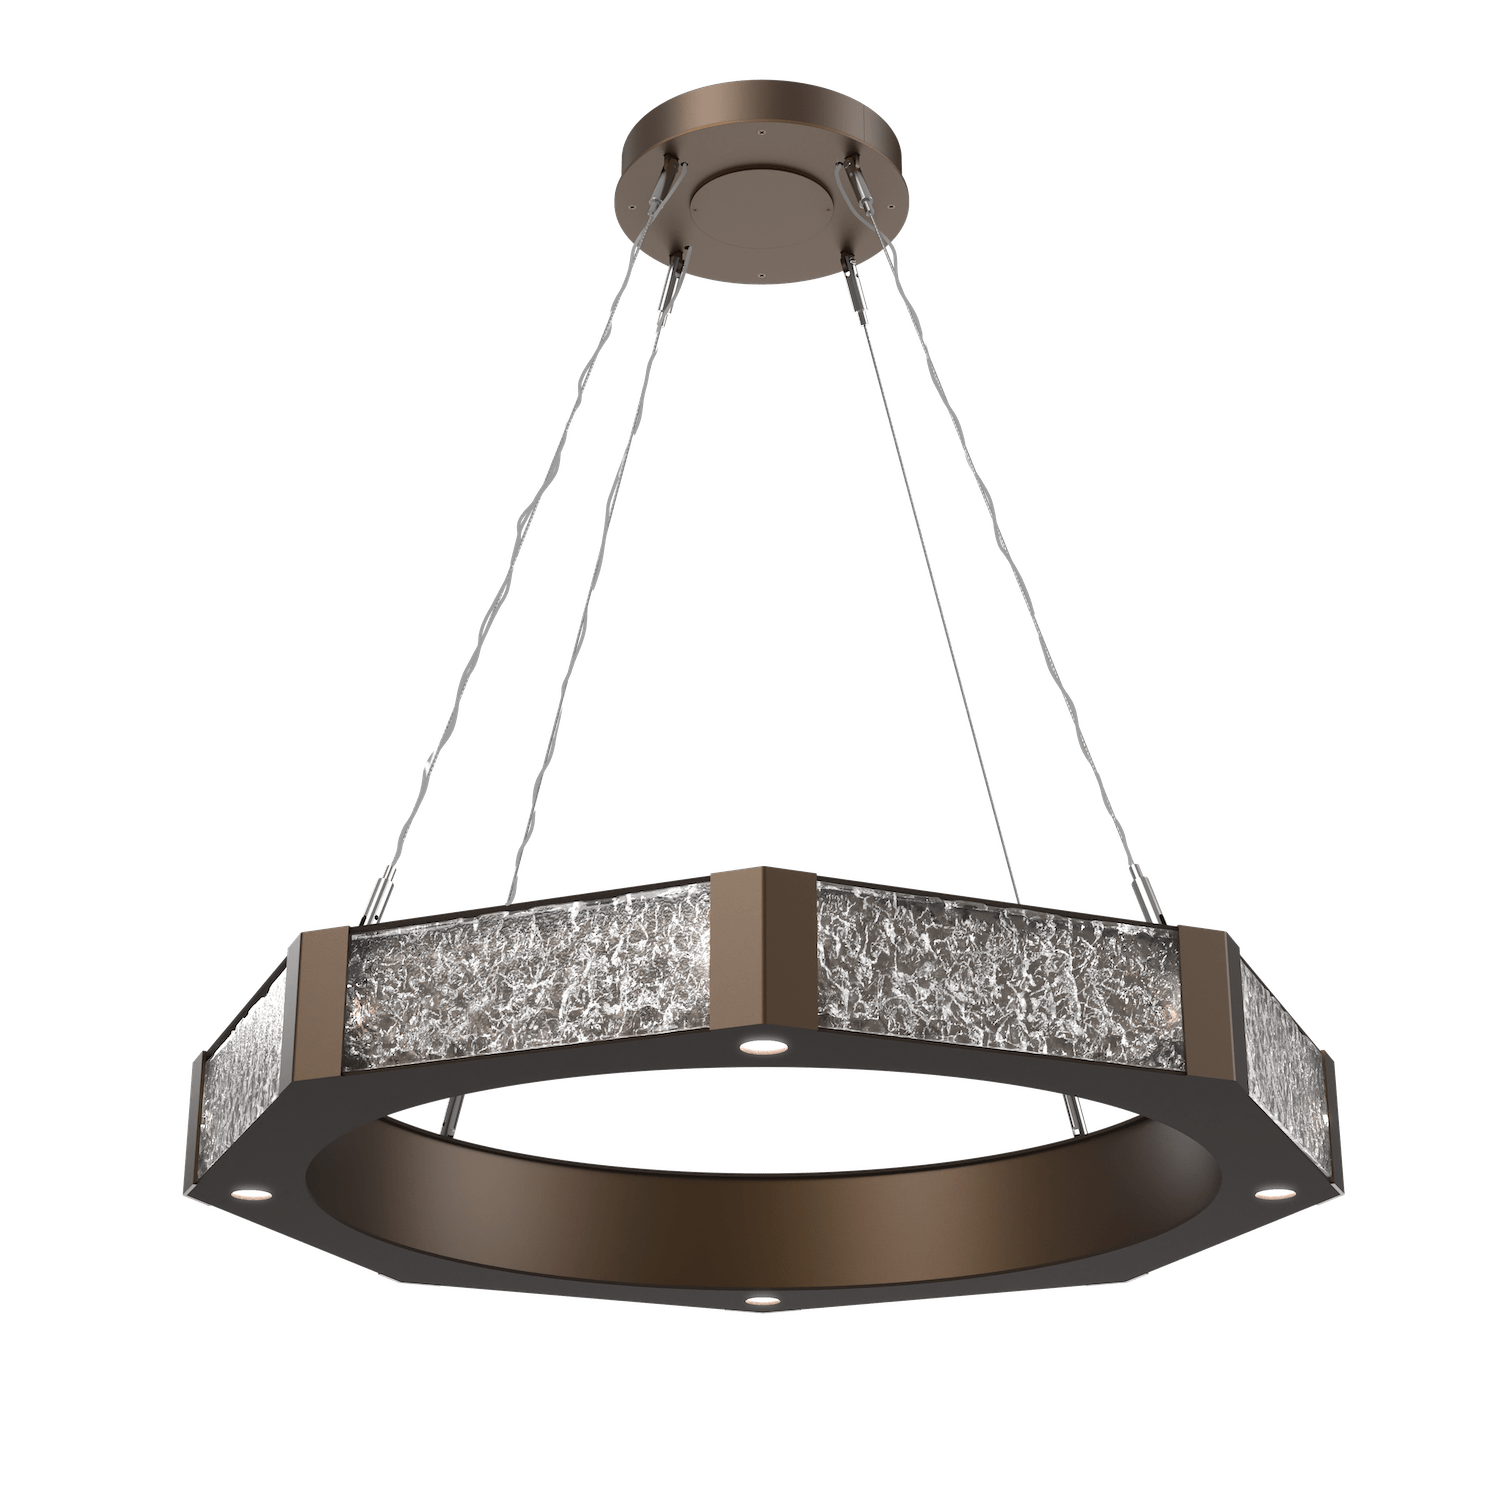 CHB0061-36-FB-GC-Hammerton-Studio-Glacier-36-inch-ring-chandelier-with-flat-bronze-finish-and-clear-blown-glass-with-geo-clear-cast-glass-diffusers-and-LED-lamping